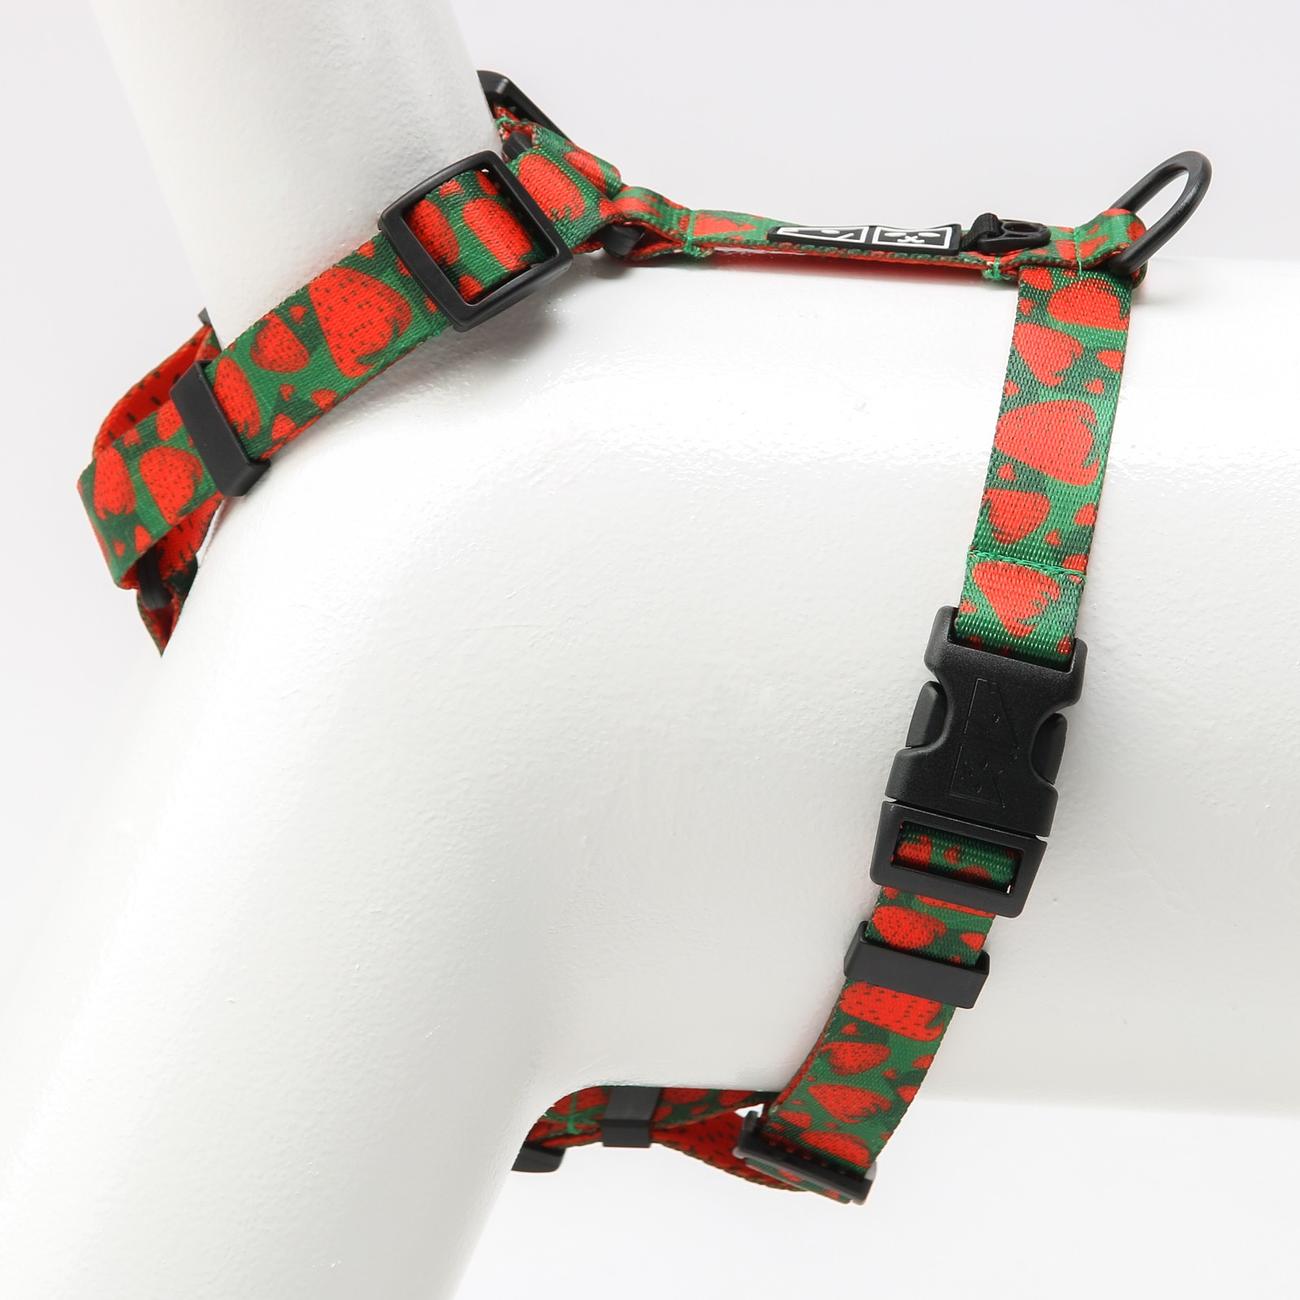 "Strawberry Fields Forever" dog or cat harness